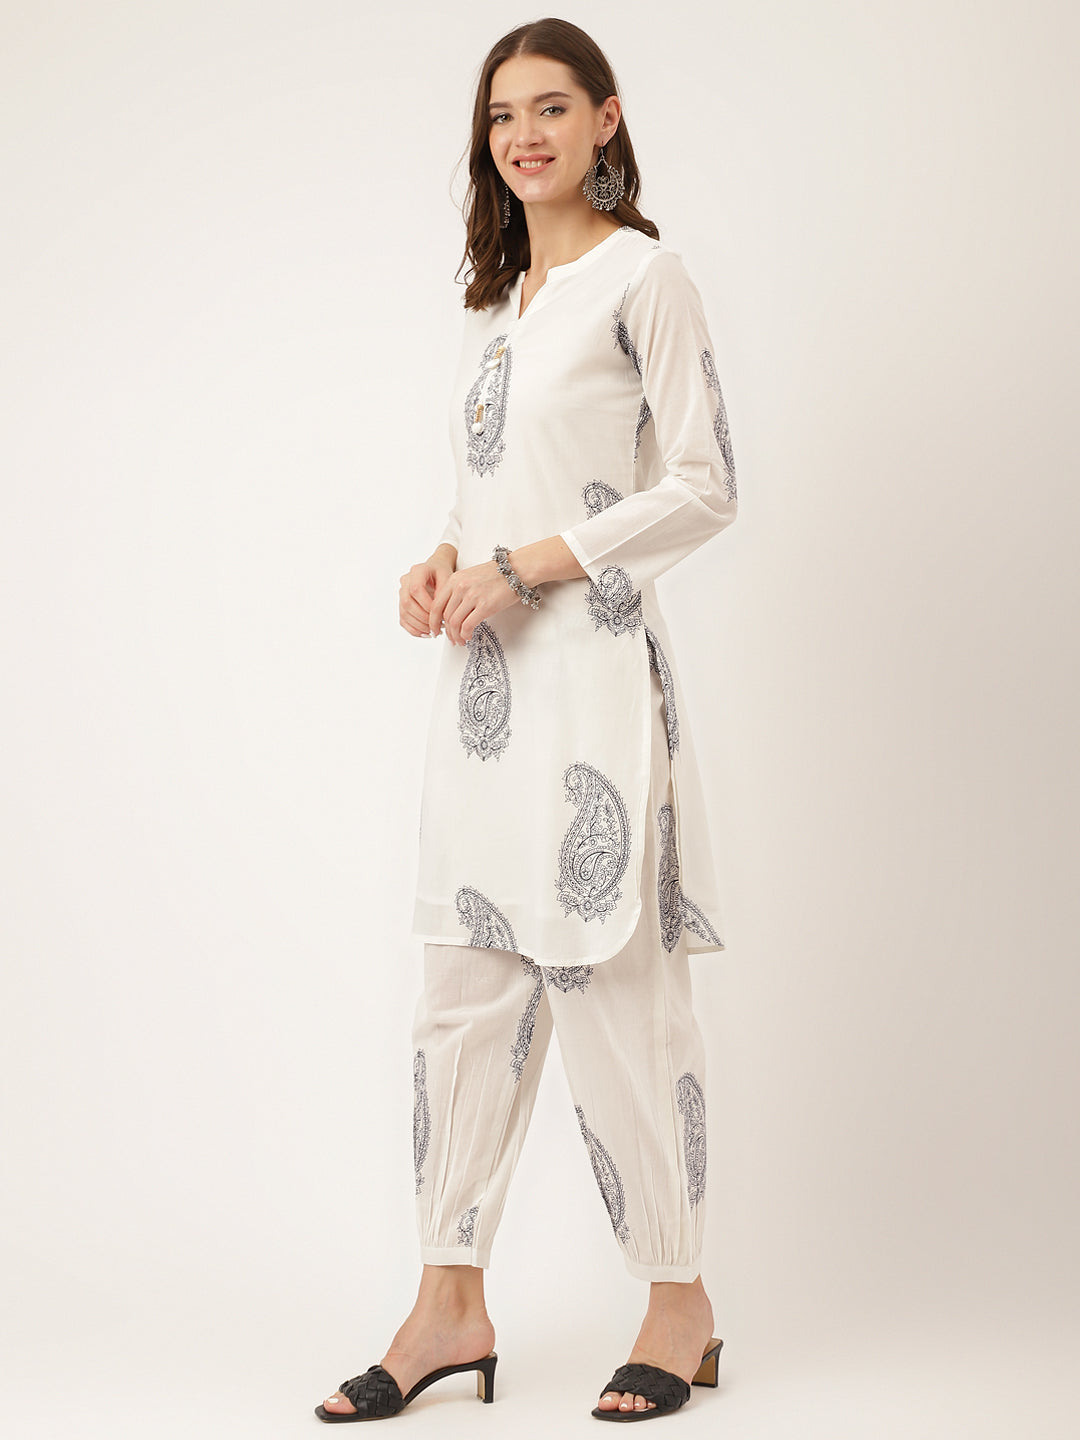 Divena White Paisley Print Cotton Co-ord Set with Mulmul Cotton Lining